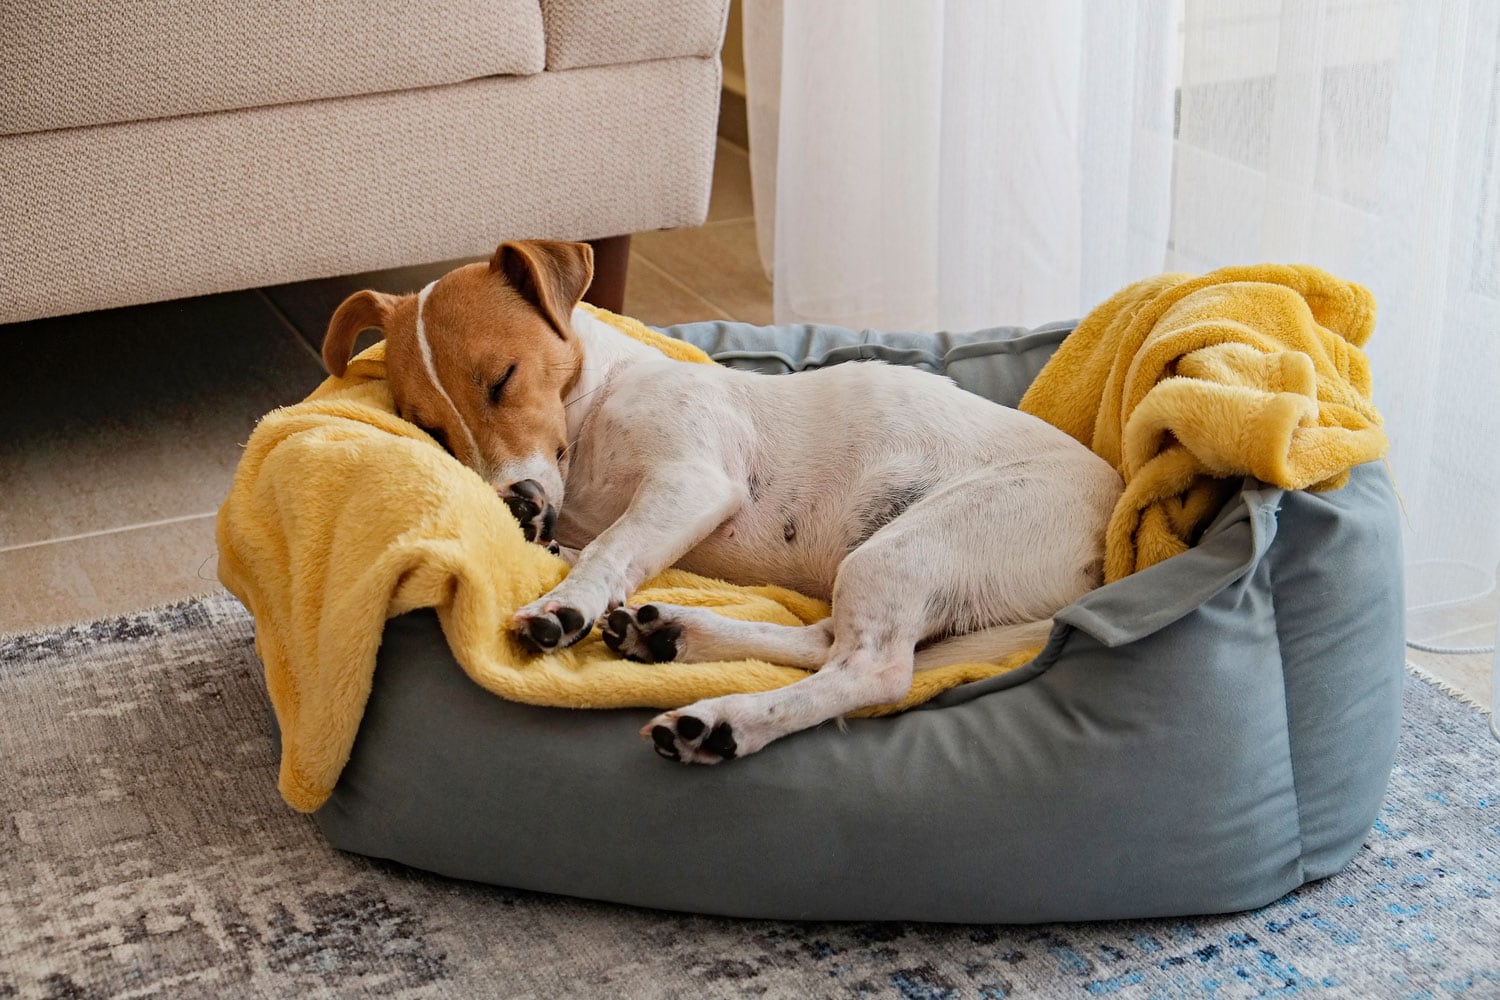 Cute dog sleeping on his doggy bed